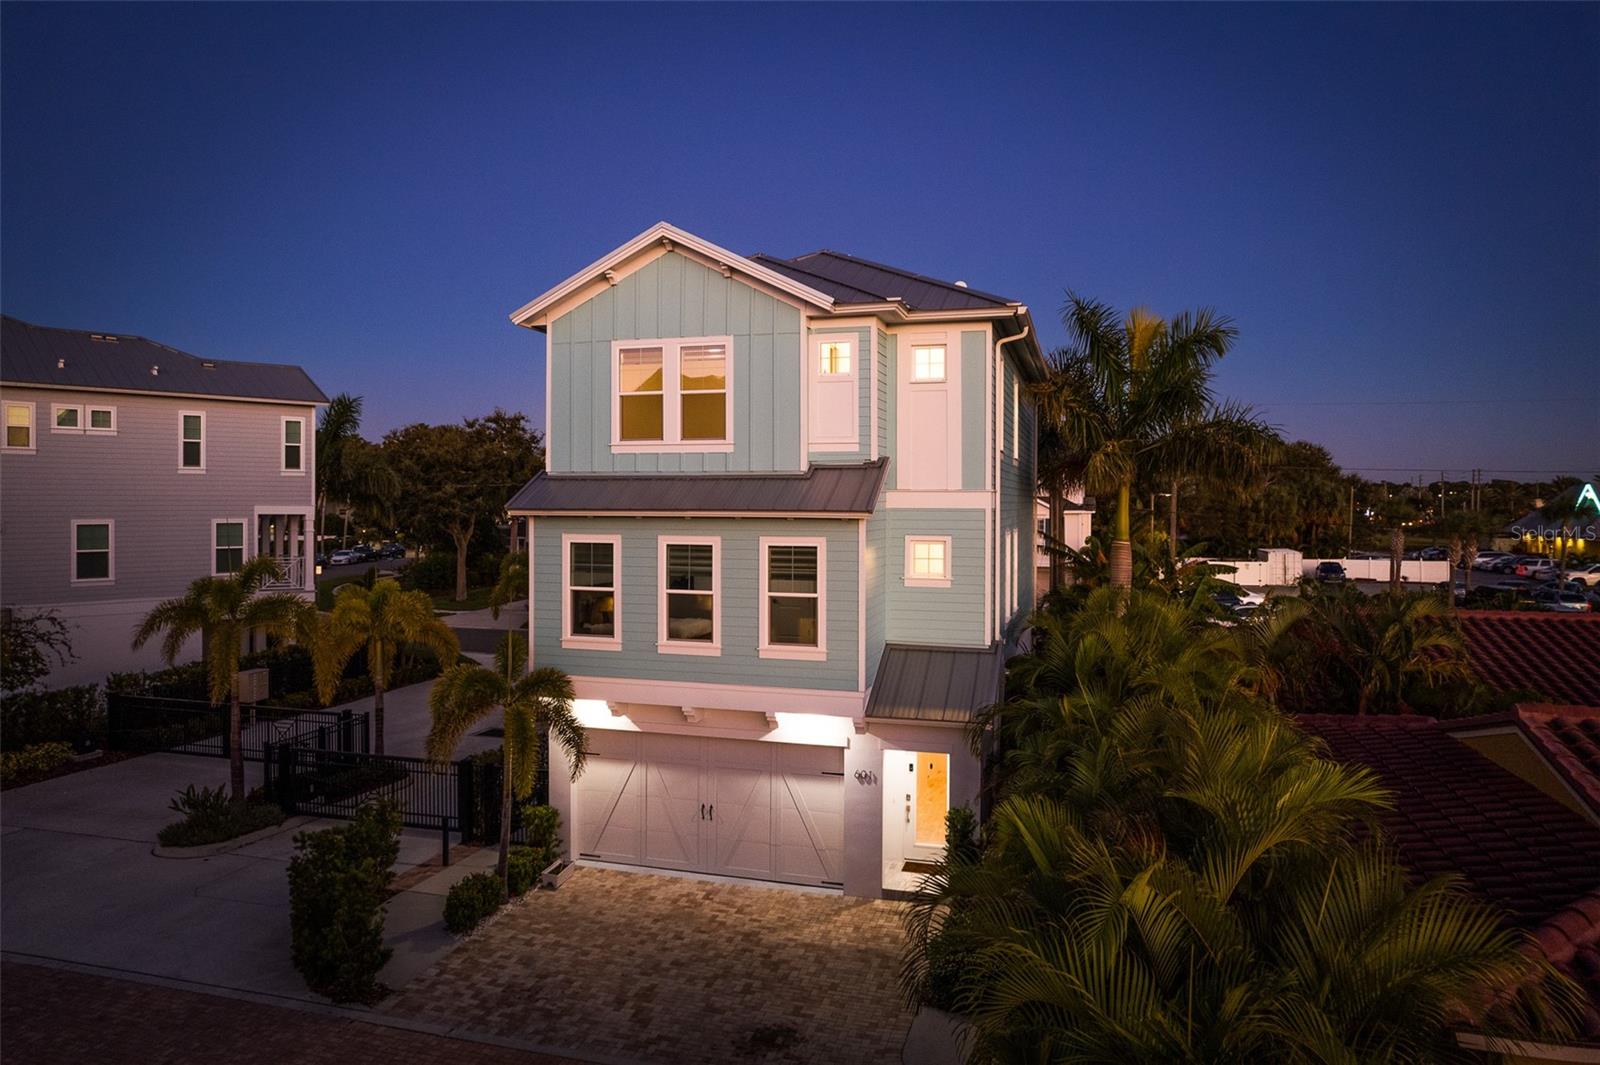 Capture the enchanting beauty of the coastal townhome with twilight photos, showcasing the allure of the Tiffany blue facade illuminated by the soft glow of evening light, inviting you to embrace the serenity and elegance of coastal living.